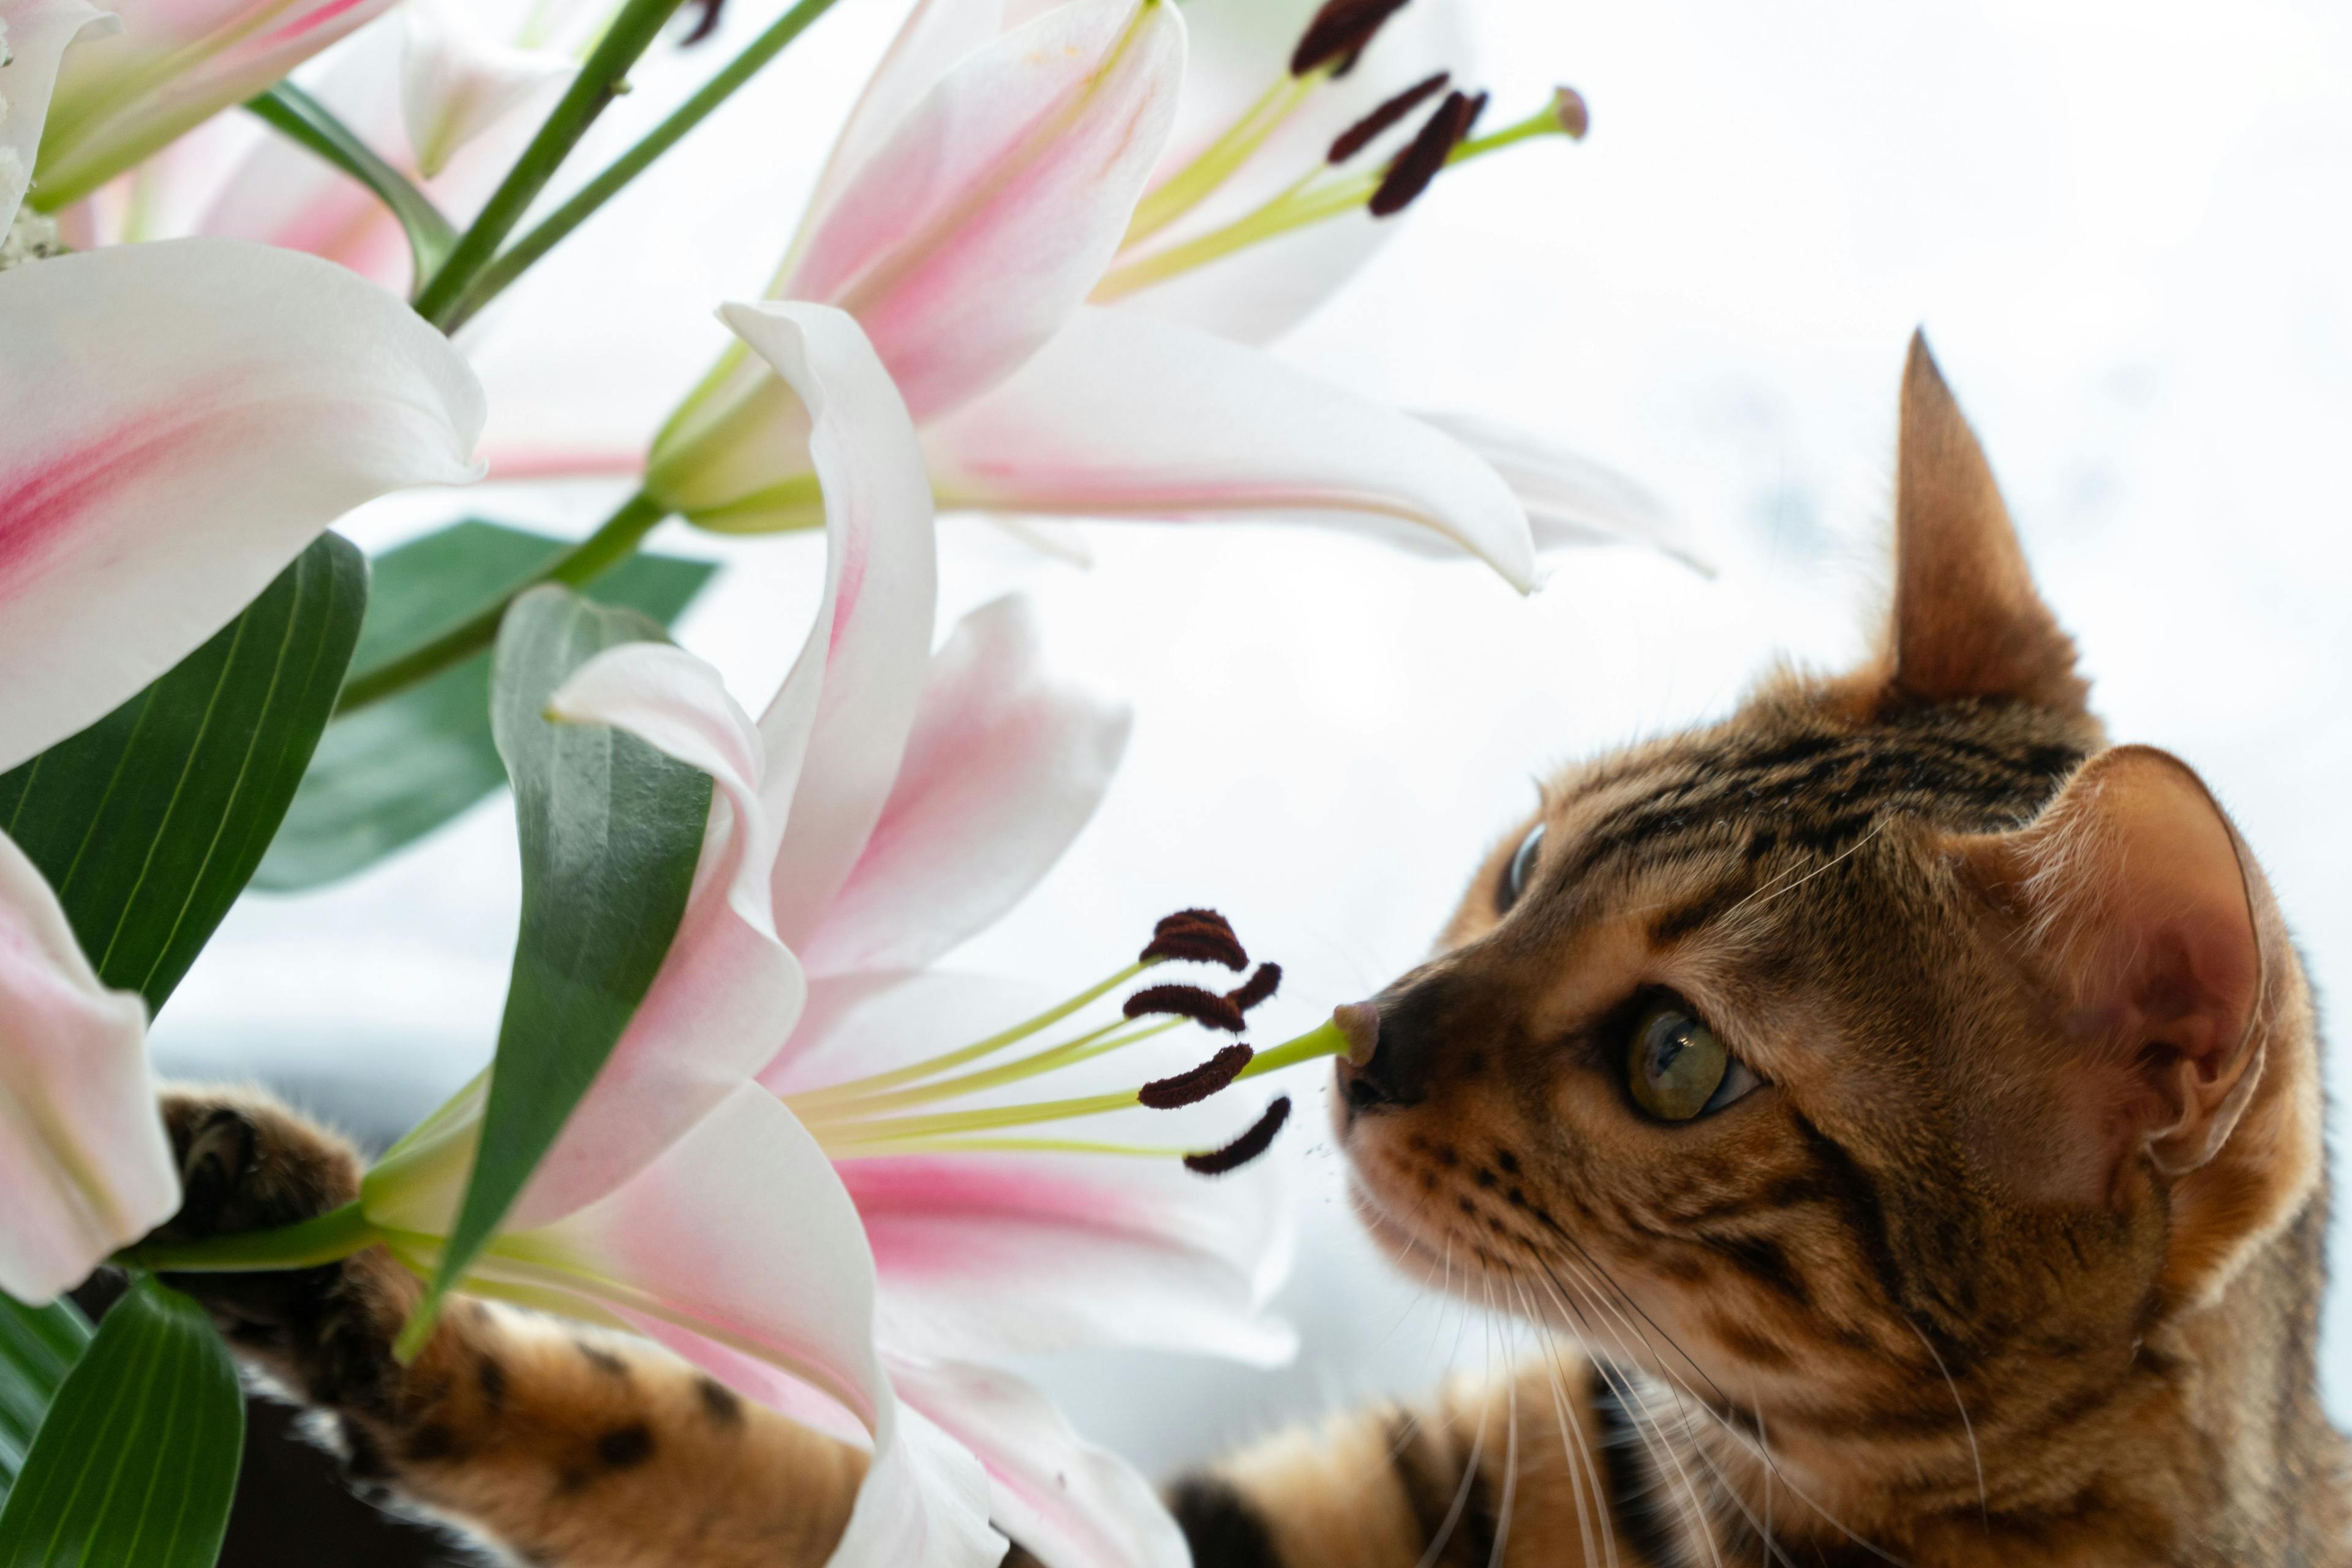 Initiative raises awareness of dangers lilies pose to cats